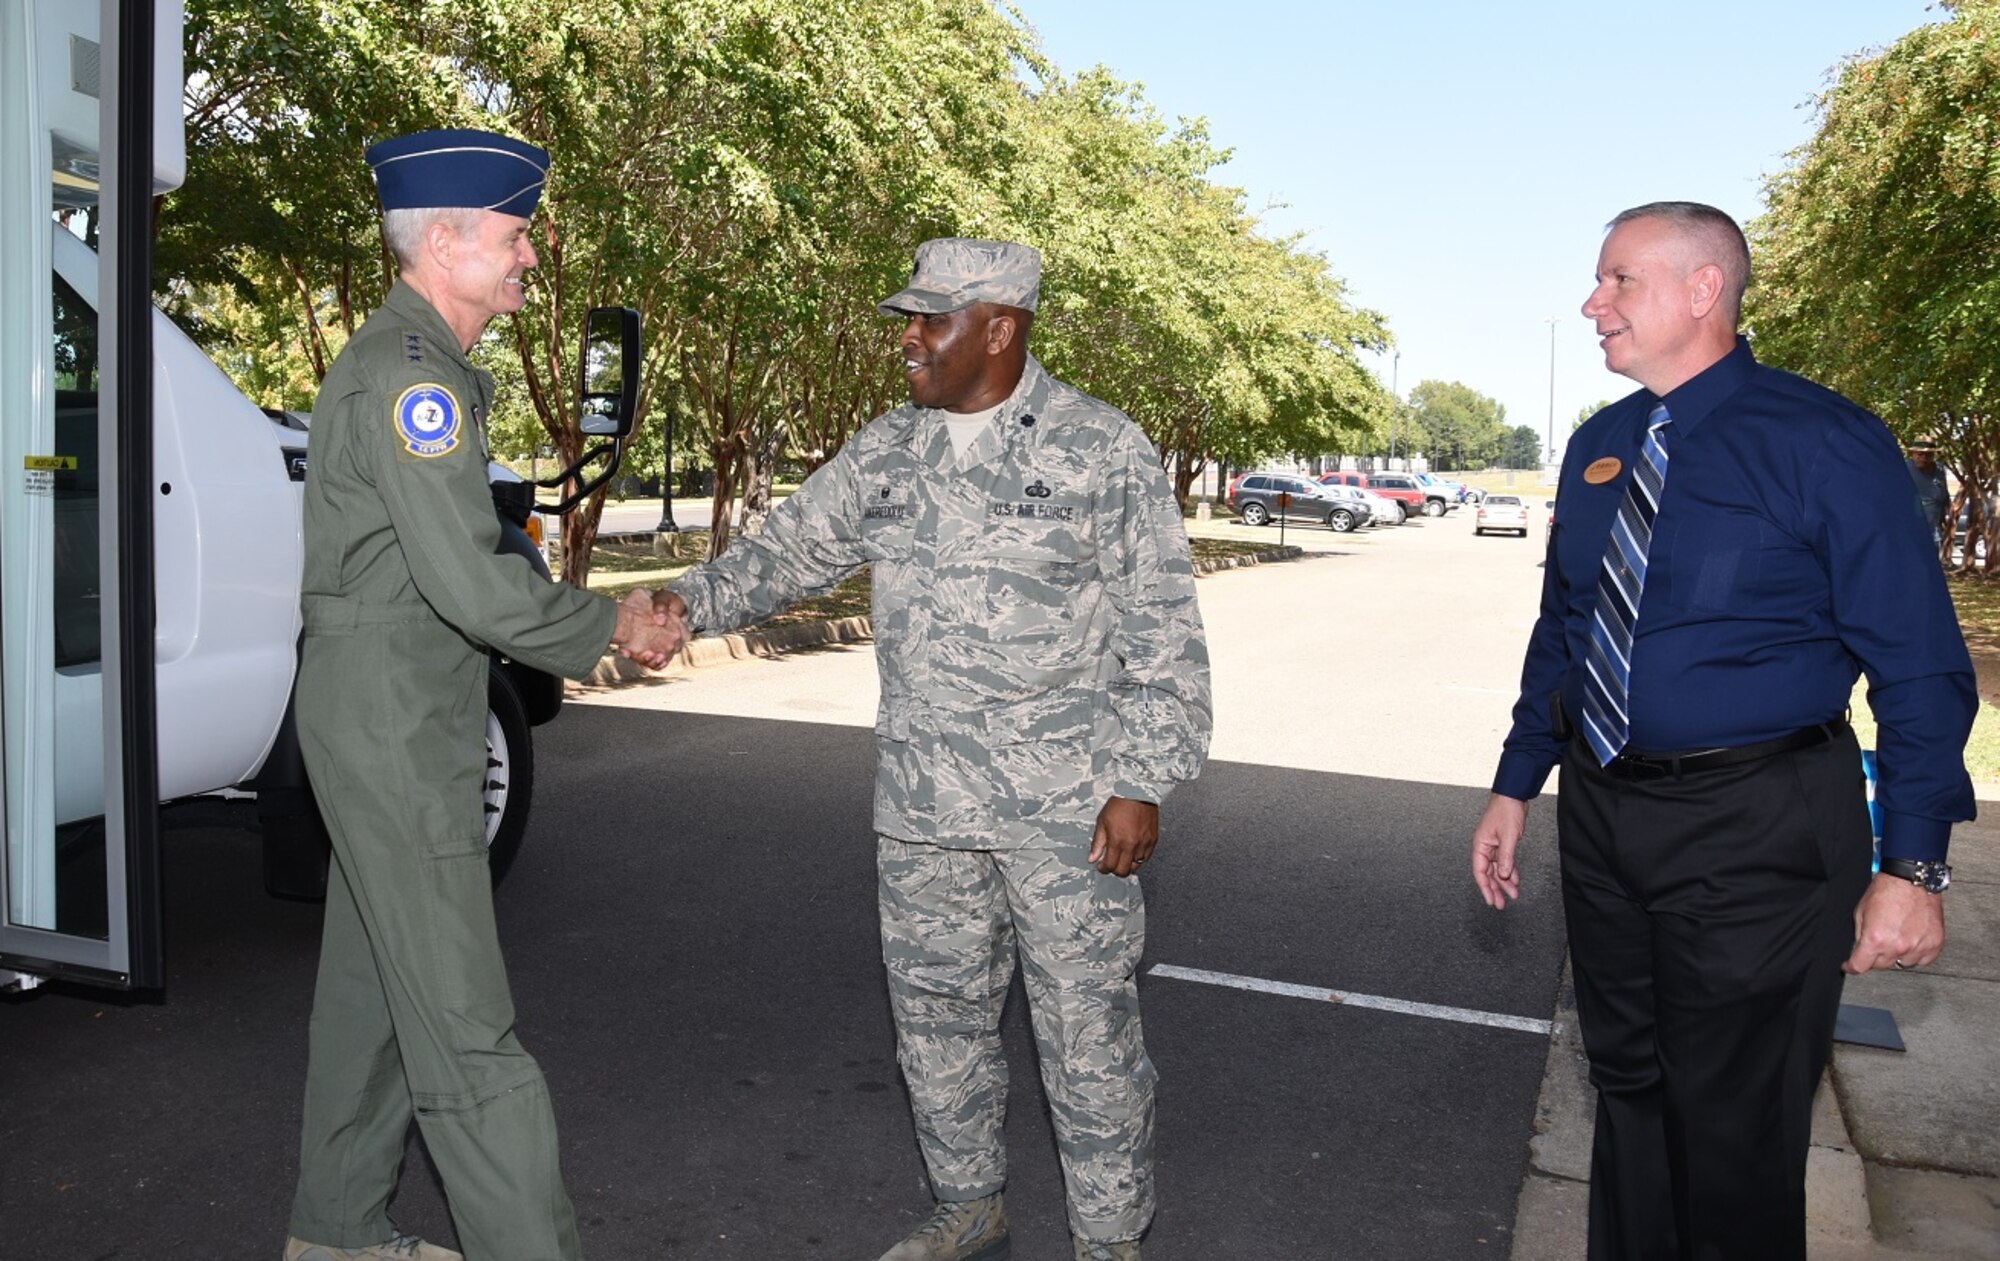 Lt. Gen. Darryl Roberson, Commander Air Education and Training Command, is greeted by Lt. Col. Daniel Akeredolu, 14th Force Support Squadron Commander, and other 14th FSS leaders Sept. 12, 2016 at Columbus Air Force Base, Mississippi. Roberson, his wife Cheryl, and Chief Master Sgt. David Staton, AETC Command Chief, were able to dine in the recently renovated Columbus Club during their visit. (U.S. Air Force photo/Elizabeth Owens)